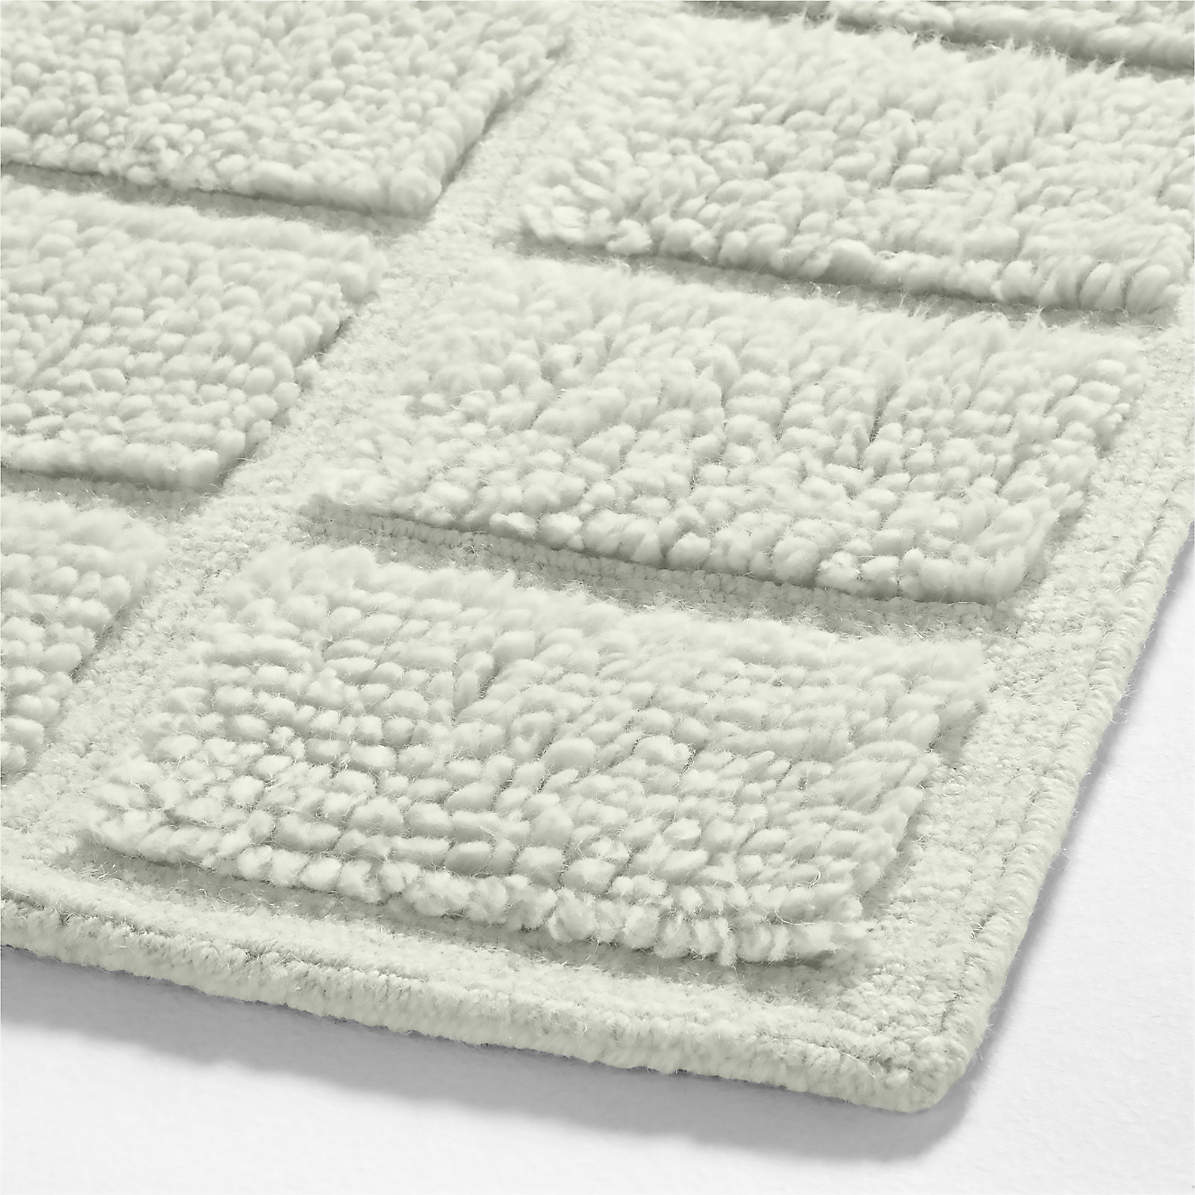 Glitzy Rugs UBSK00513T0131C3 6 x 6 ft. Hand Tufted Wool Floral Square Area  Rug, Beige & White, 1 - Kroger